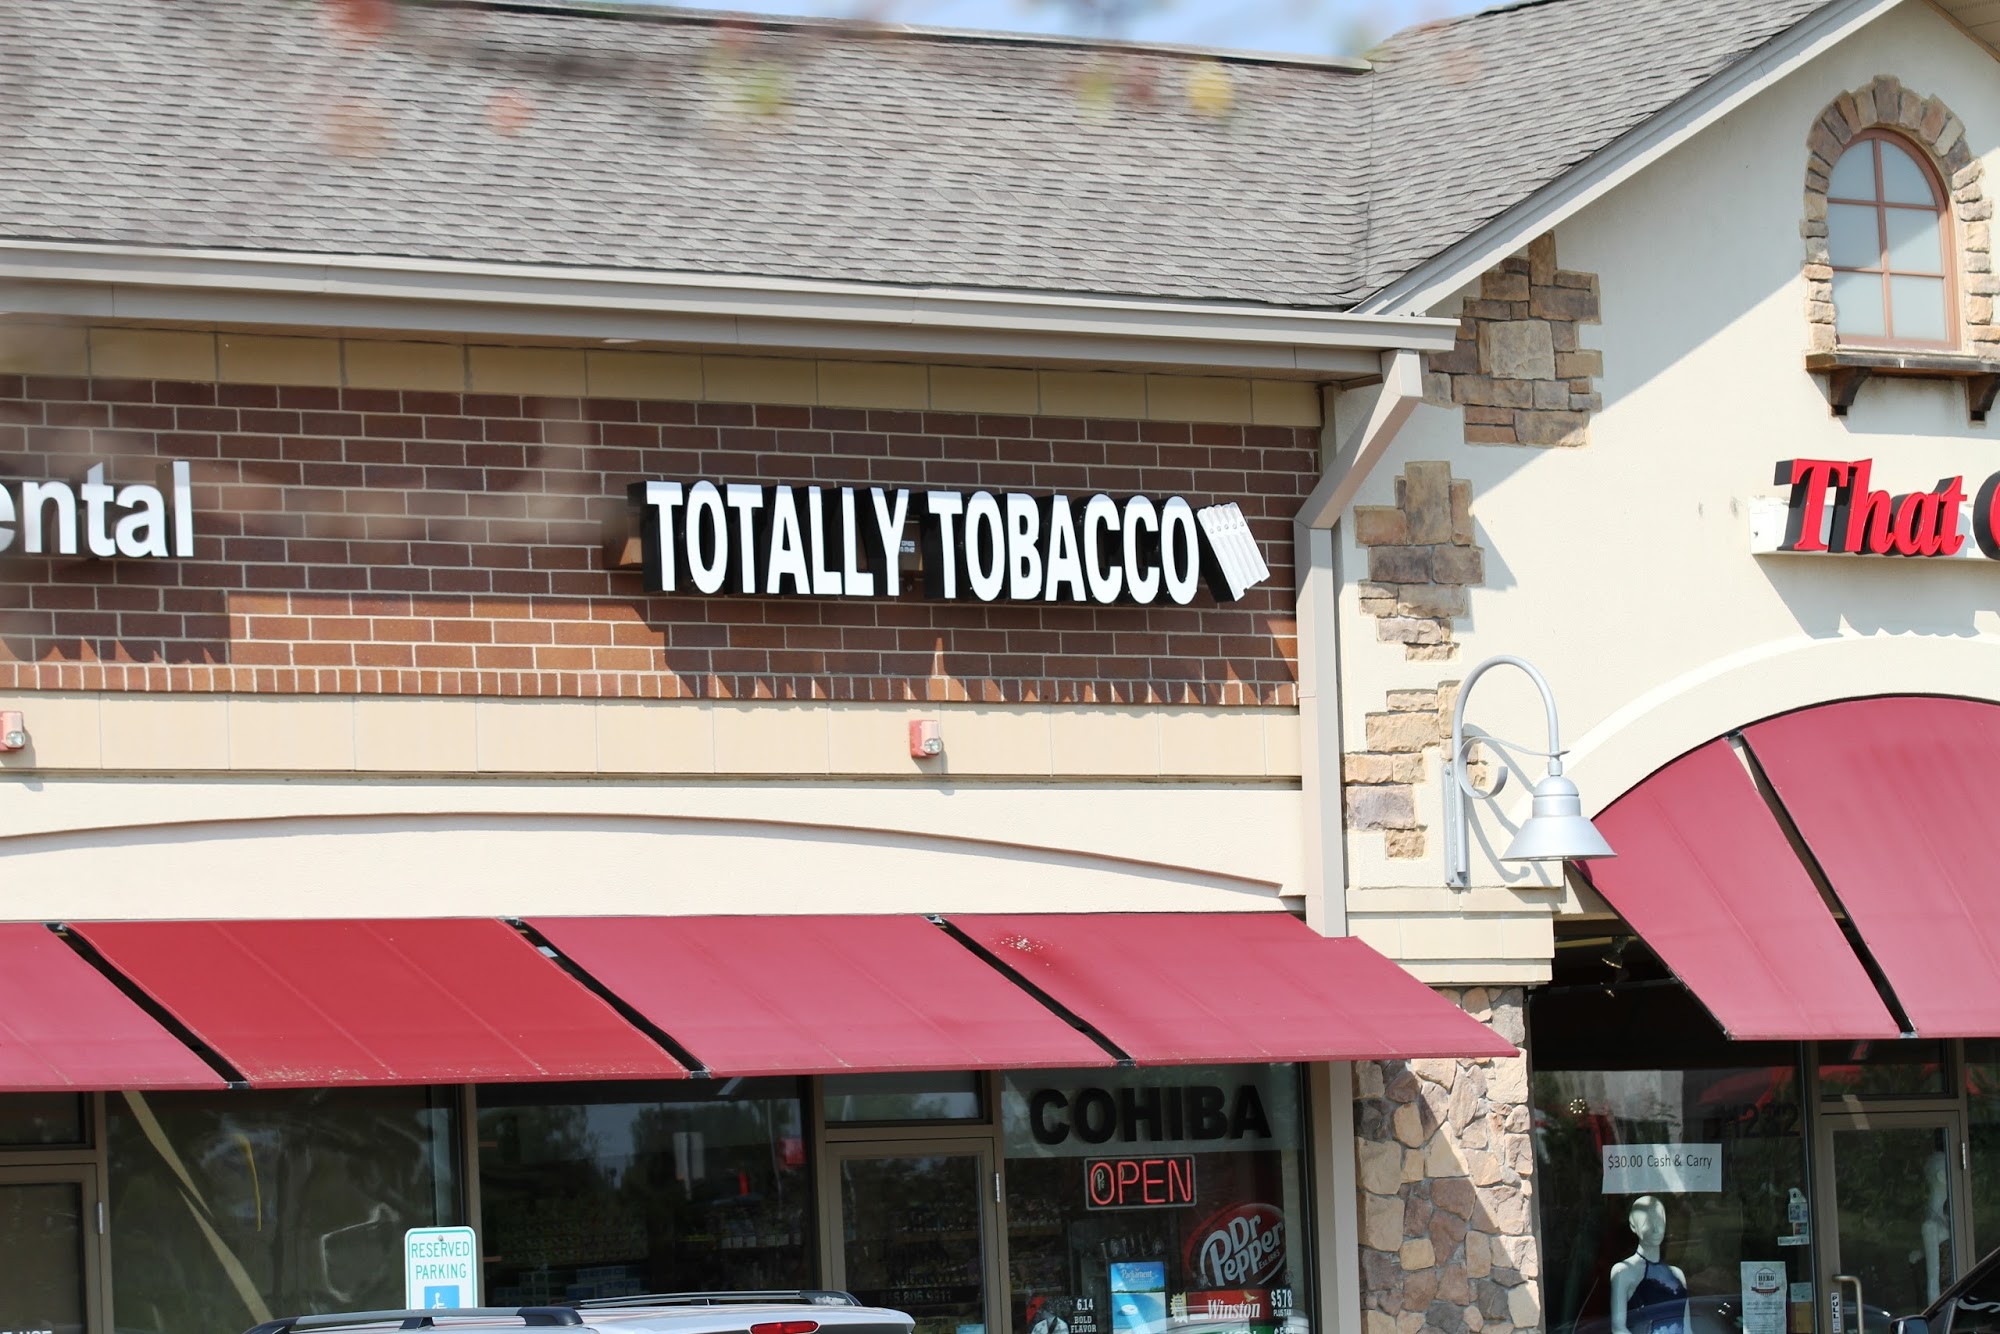 Totally Tobacco Inc